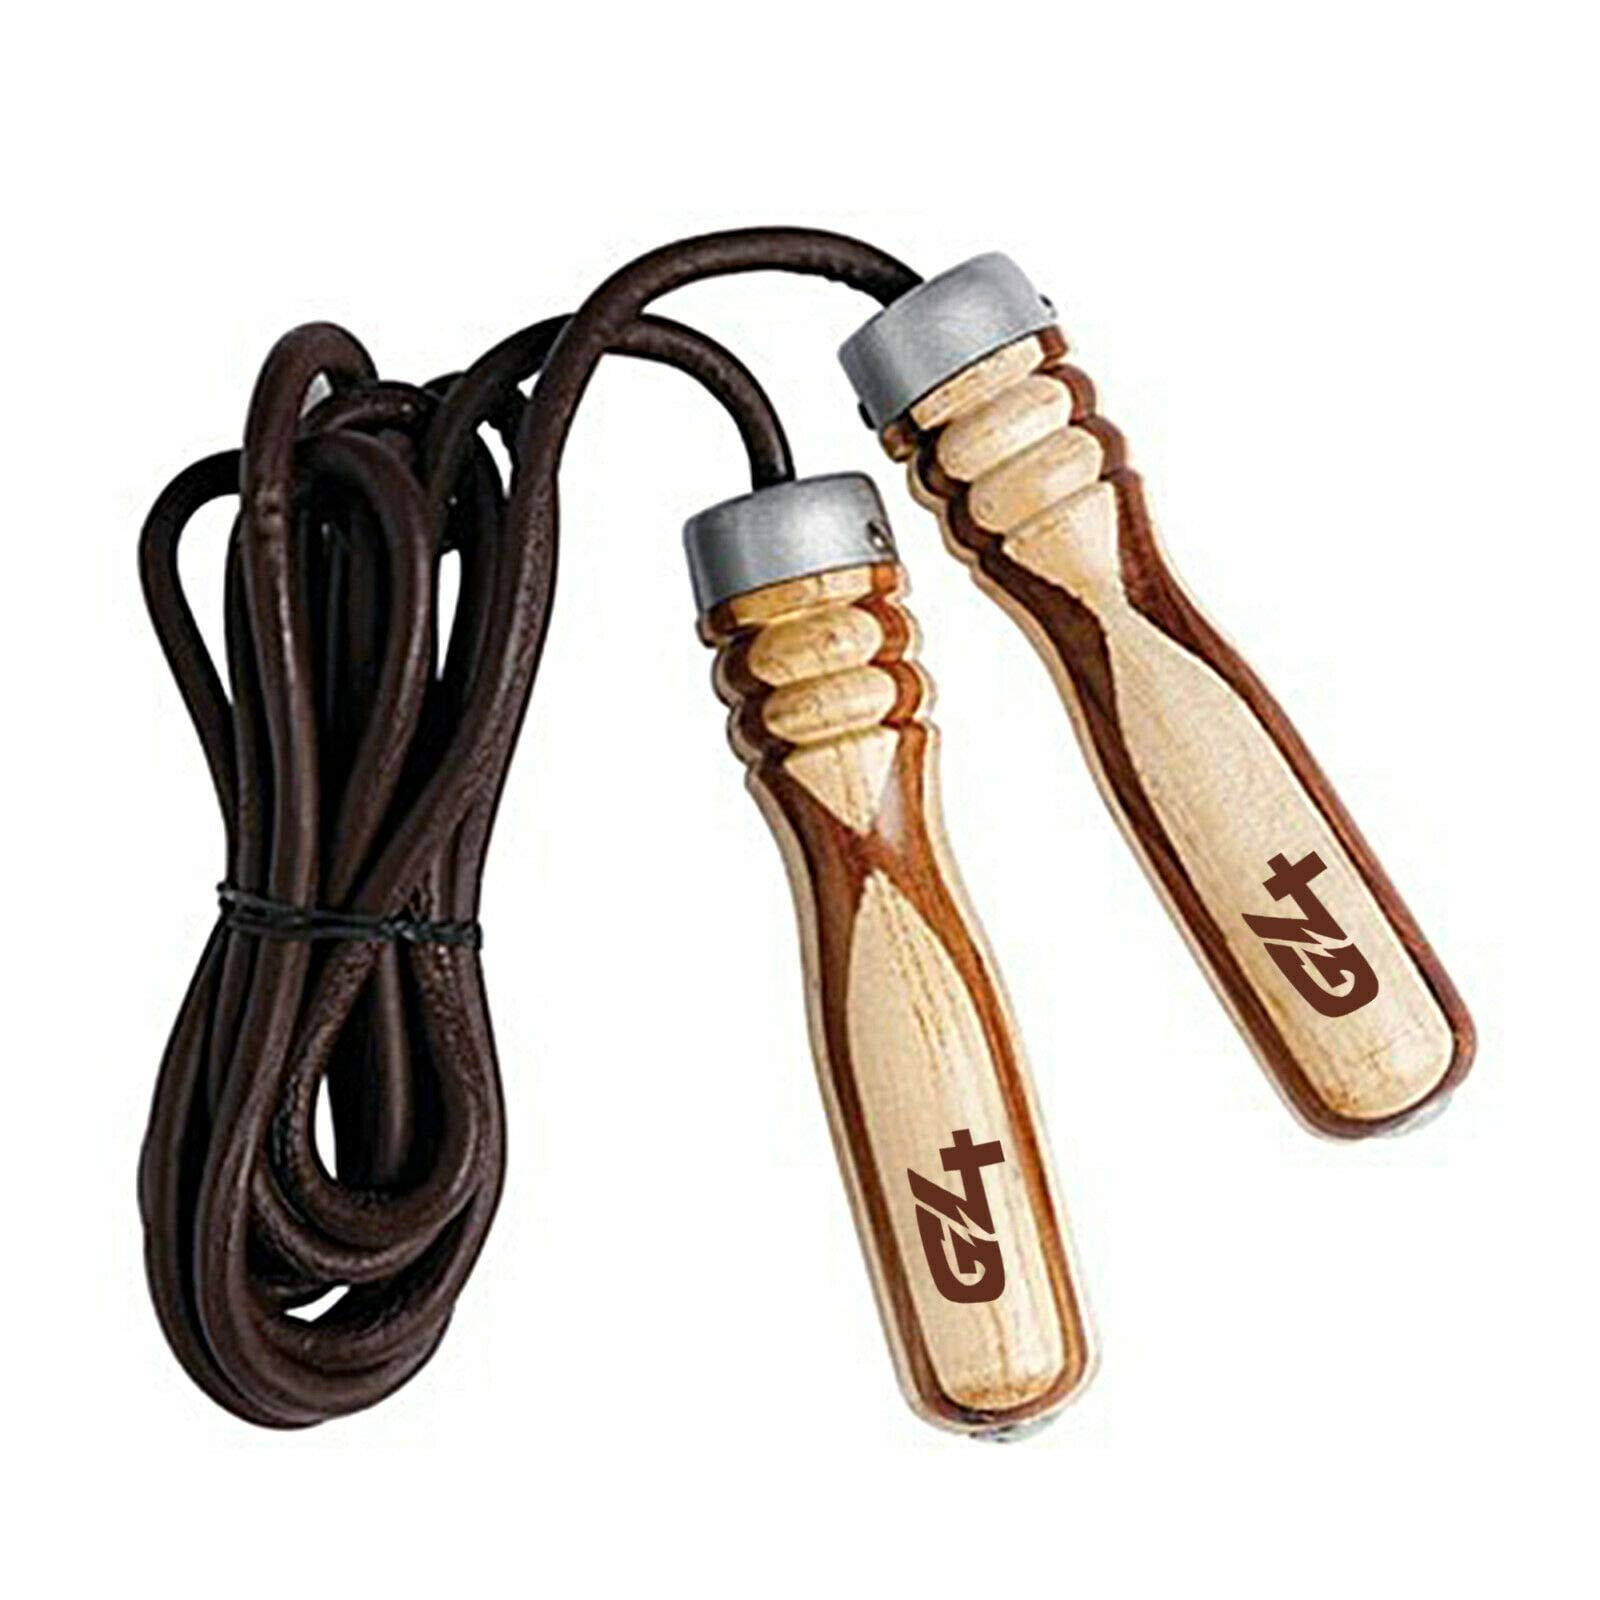 Leather Jump Rope Exercise Heavy Duty Skipping Fitness Wooden Handle 